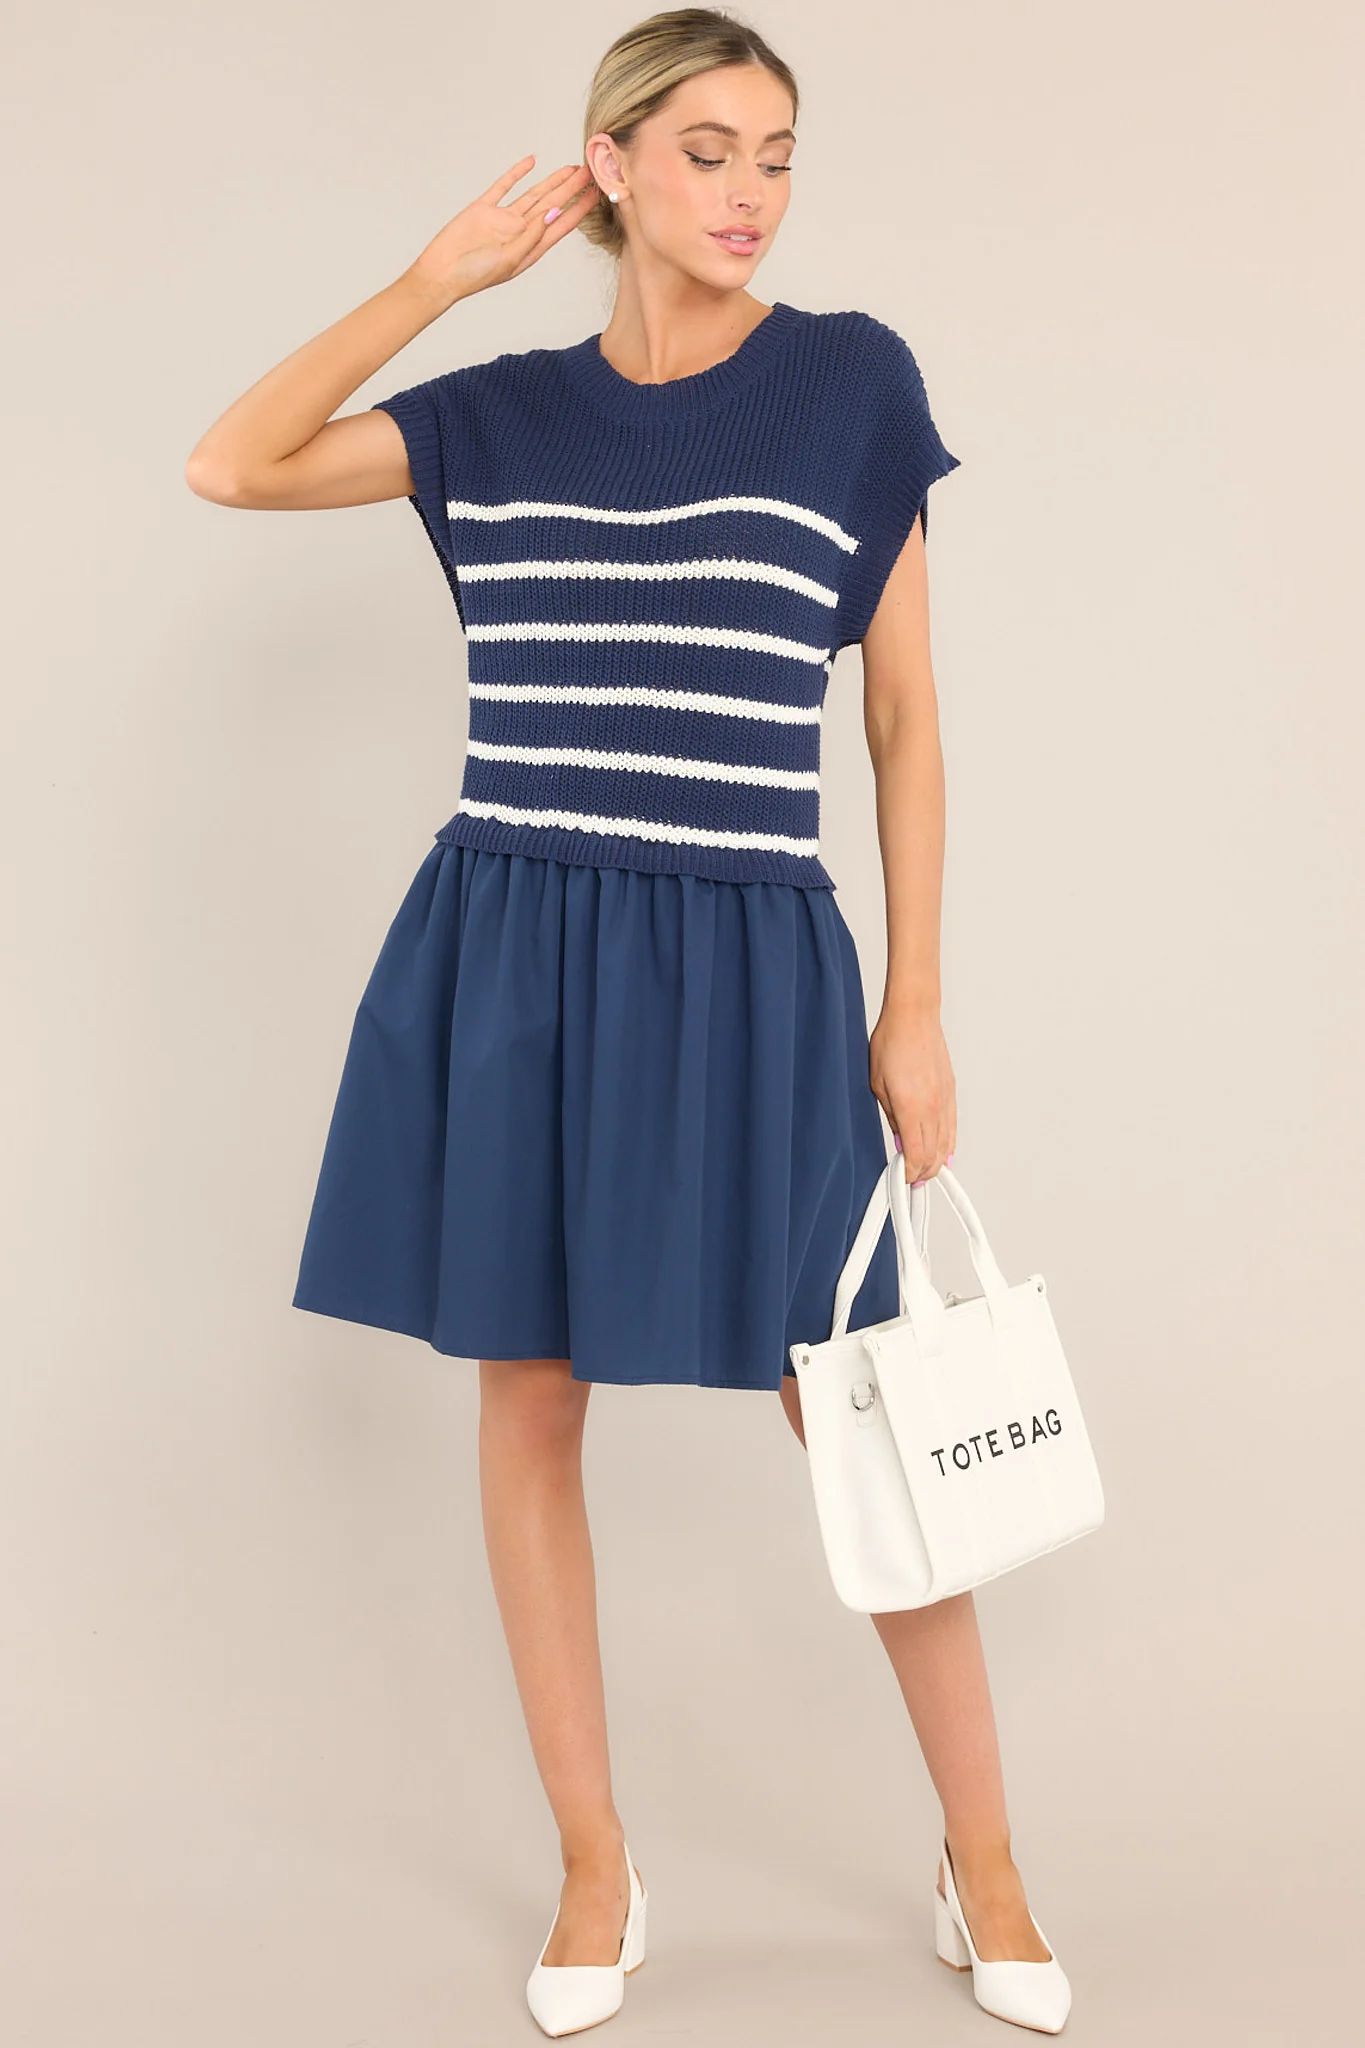 Journey Continues Navy & White Stripe Sweater Mini Dress | Red Dress